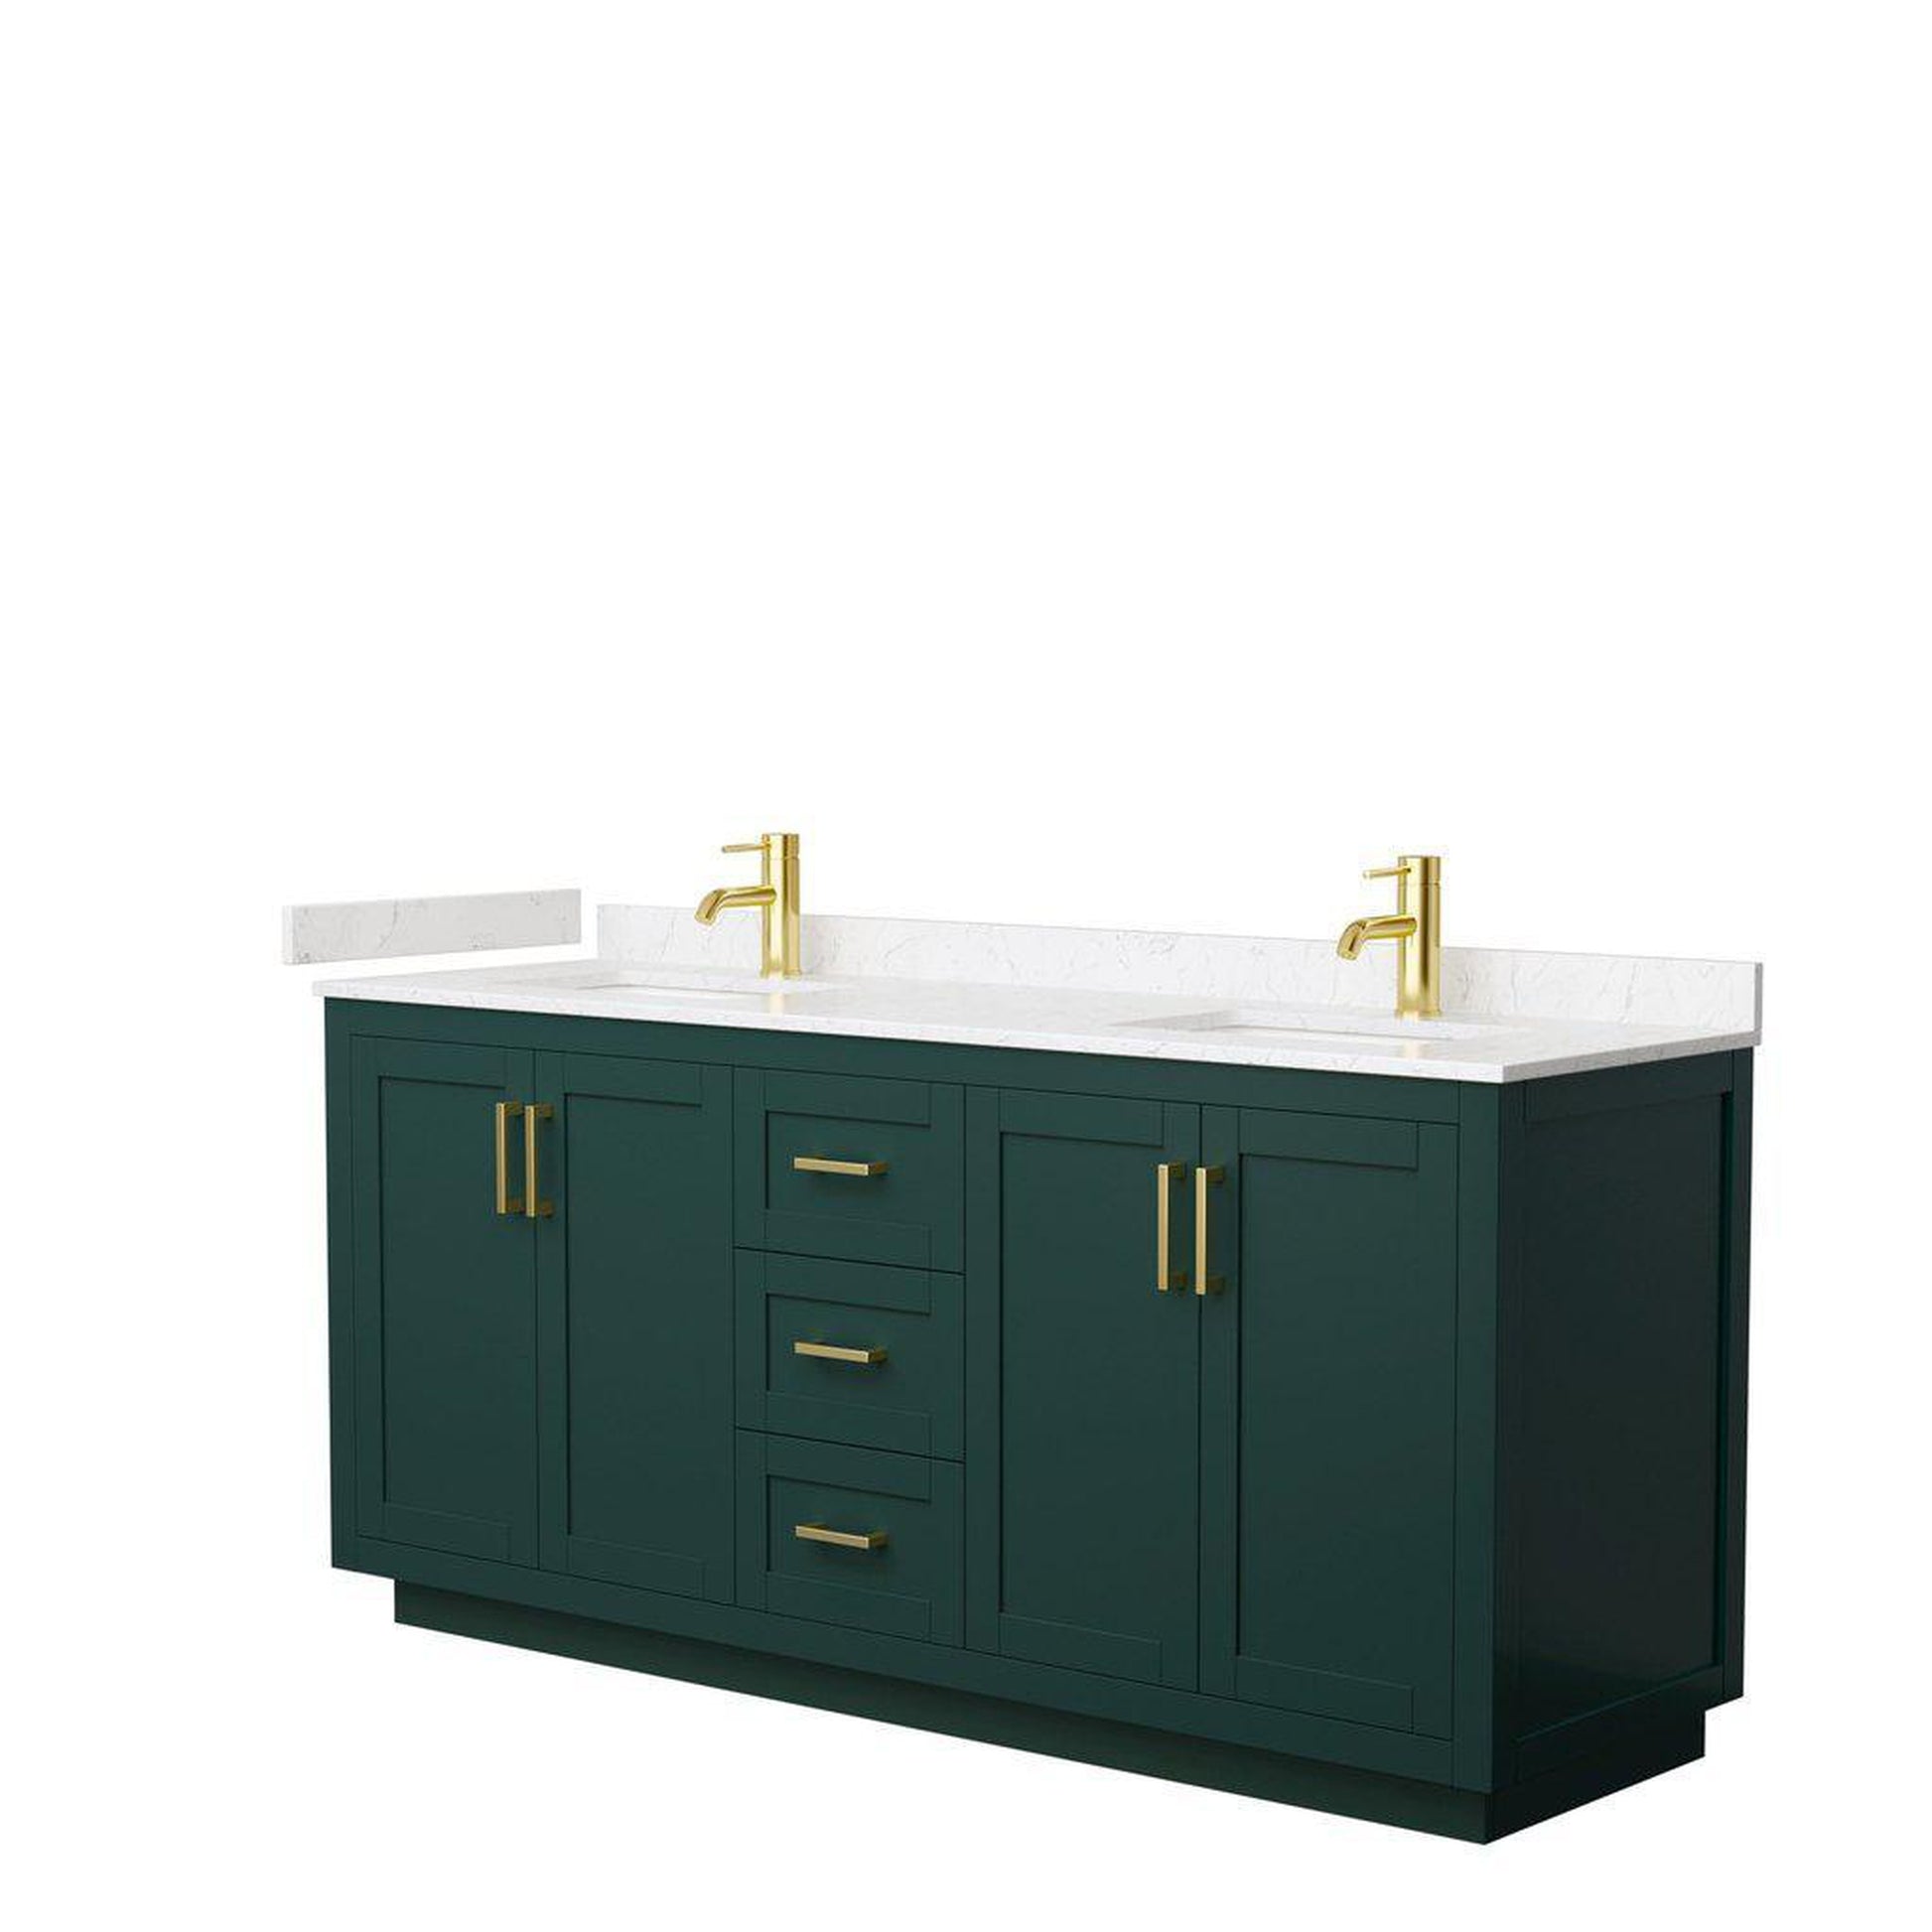 Wyndham Collection Miranda 72" Double Bathroom Green Vanity Set With Light-Vein Carrara Cultured Marble Countertop, Undermount Square Sink, And Brushed Gold Trim